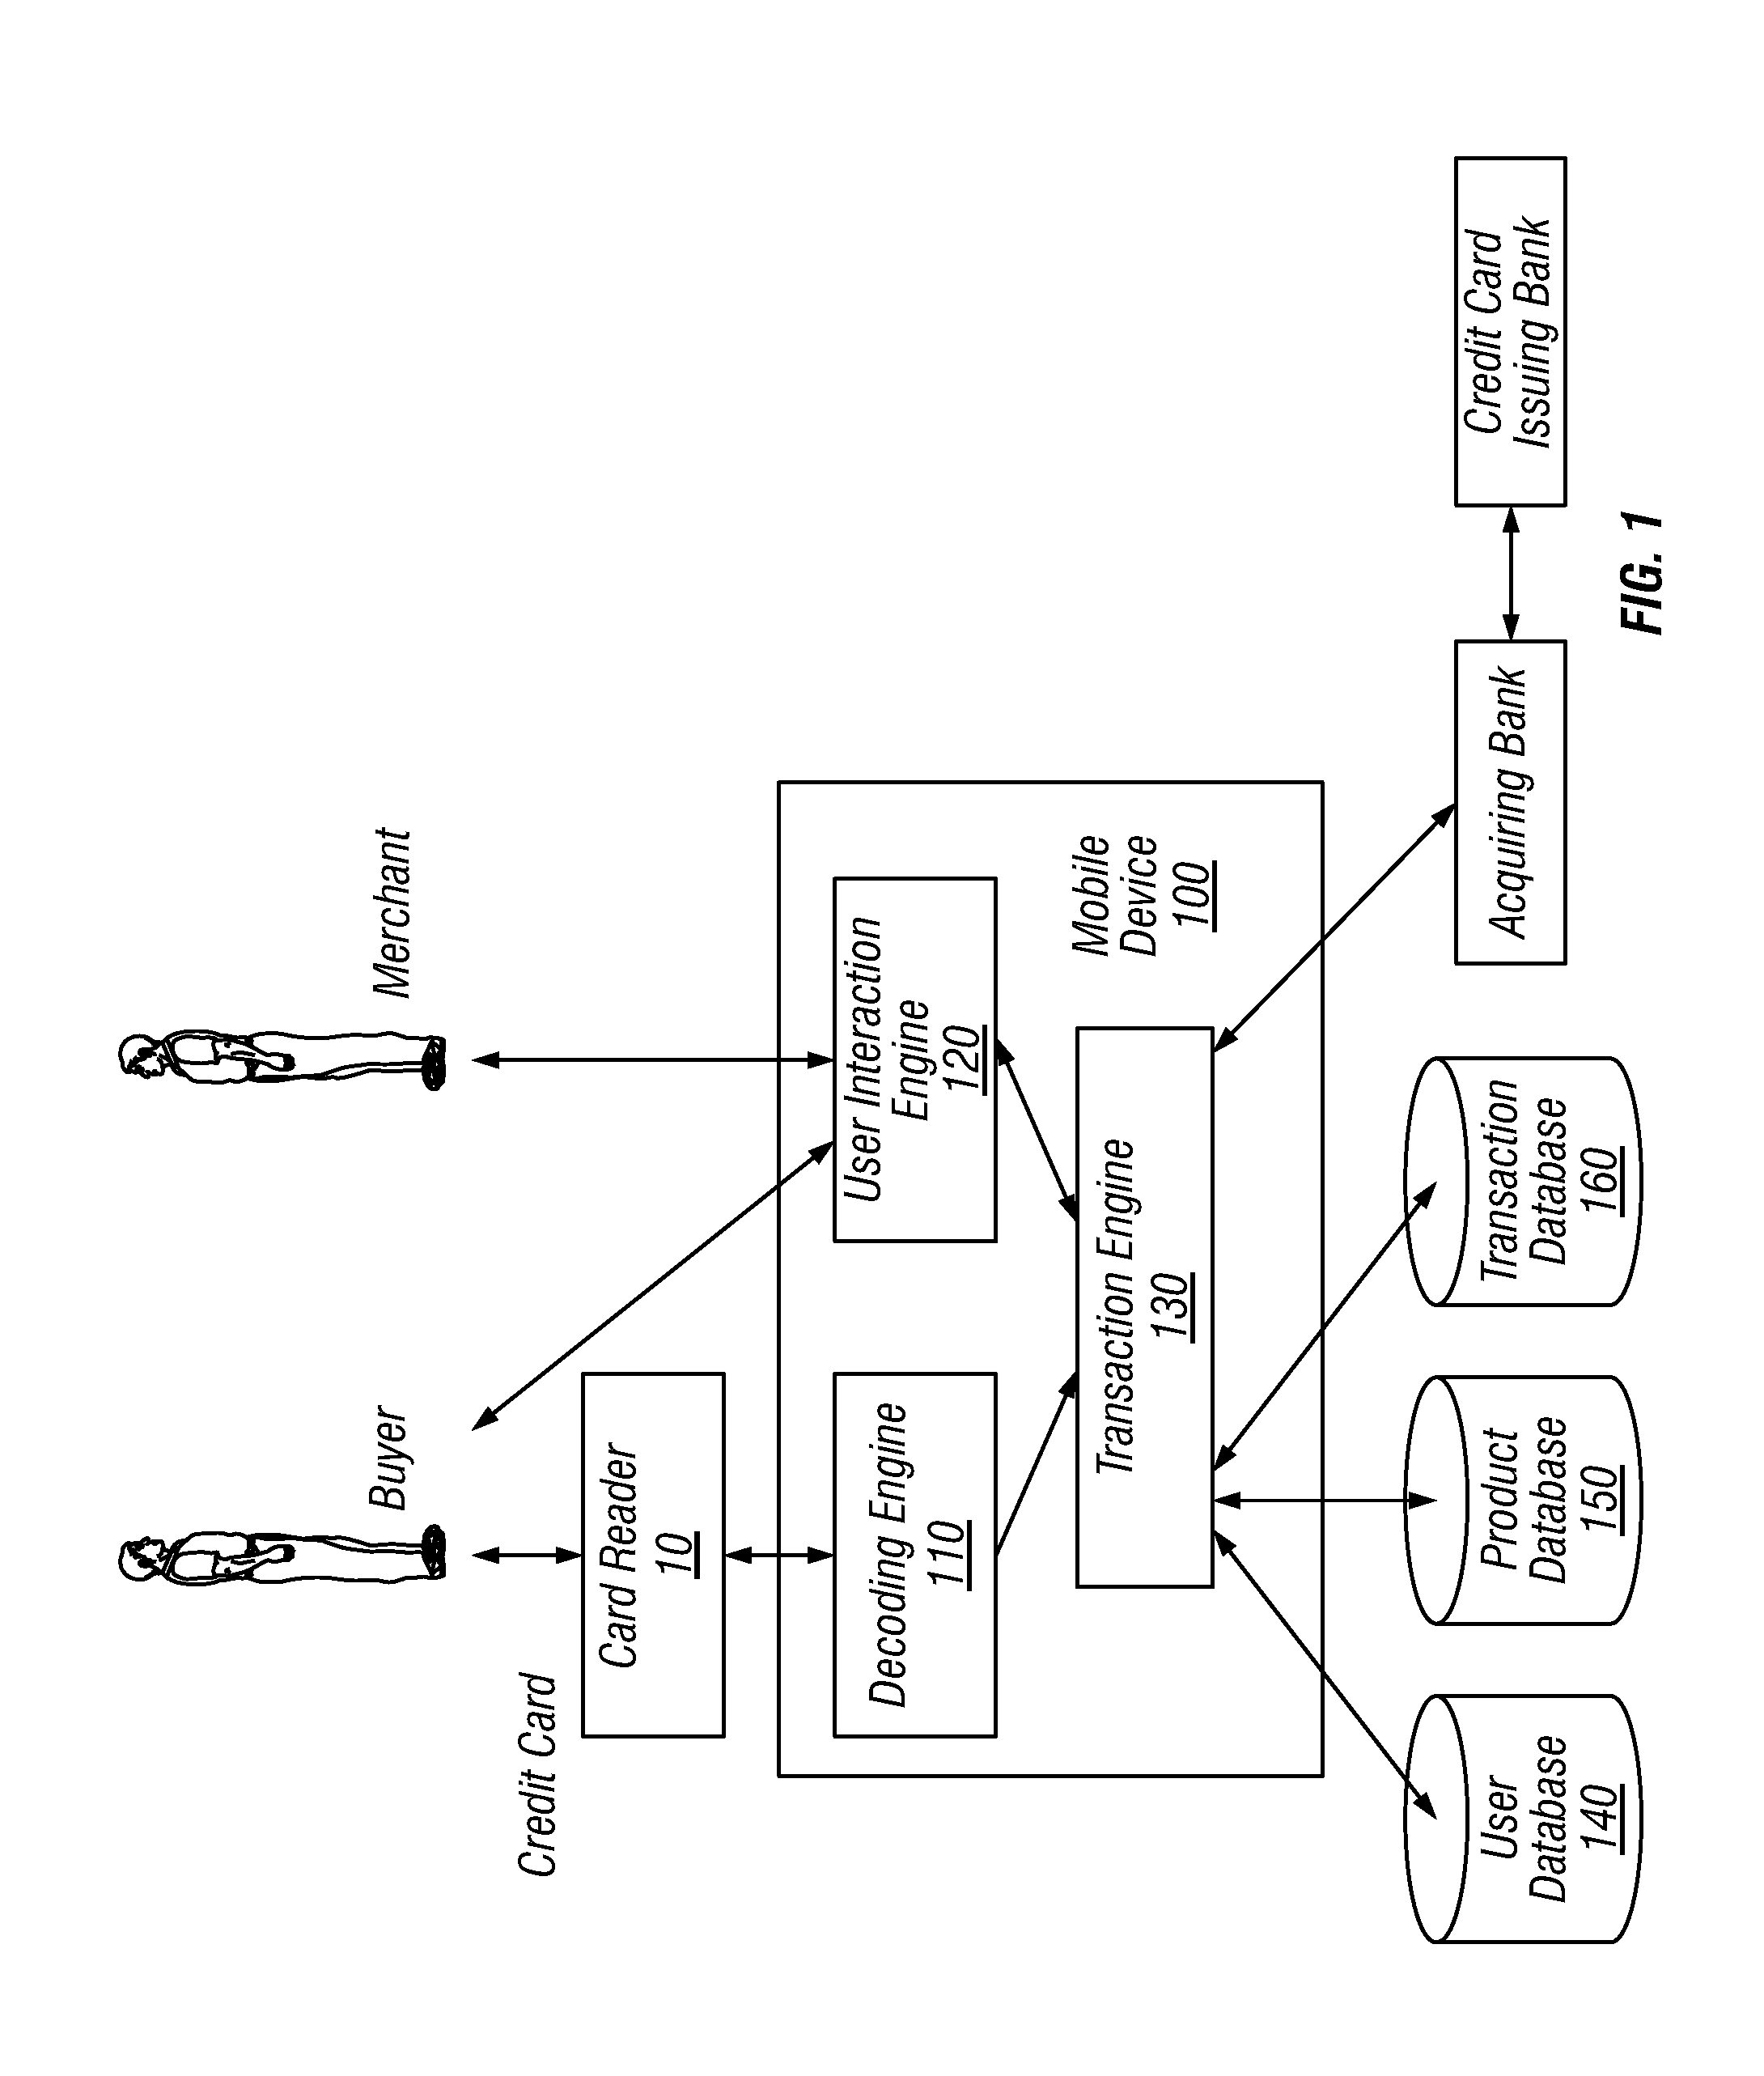 Card reader with communication protocol